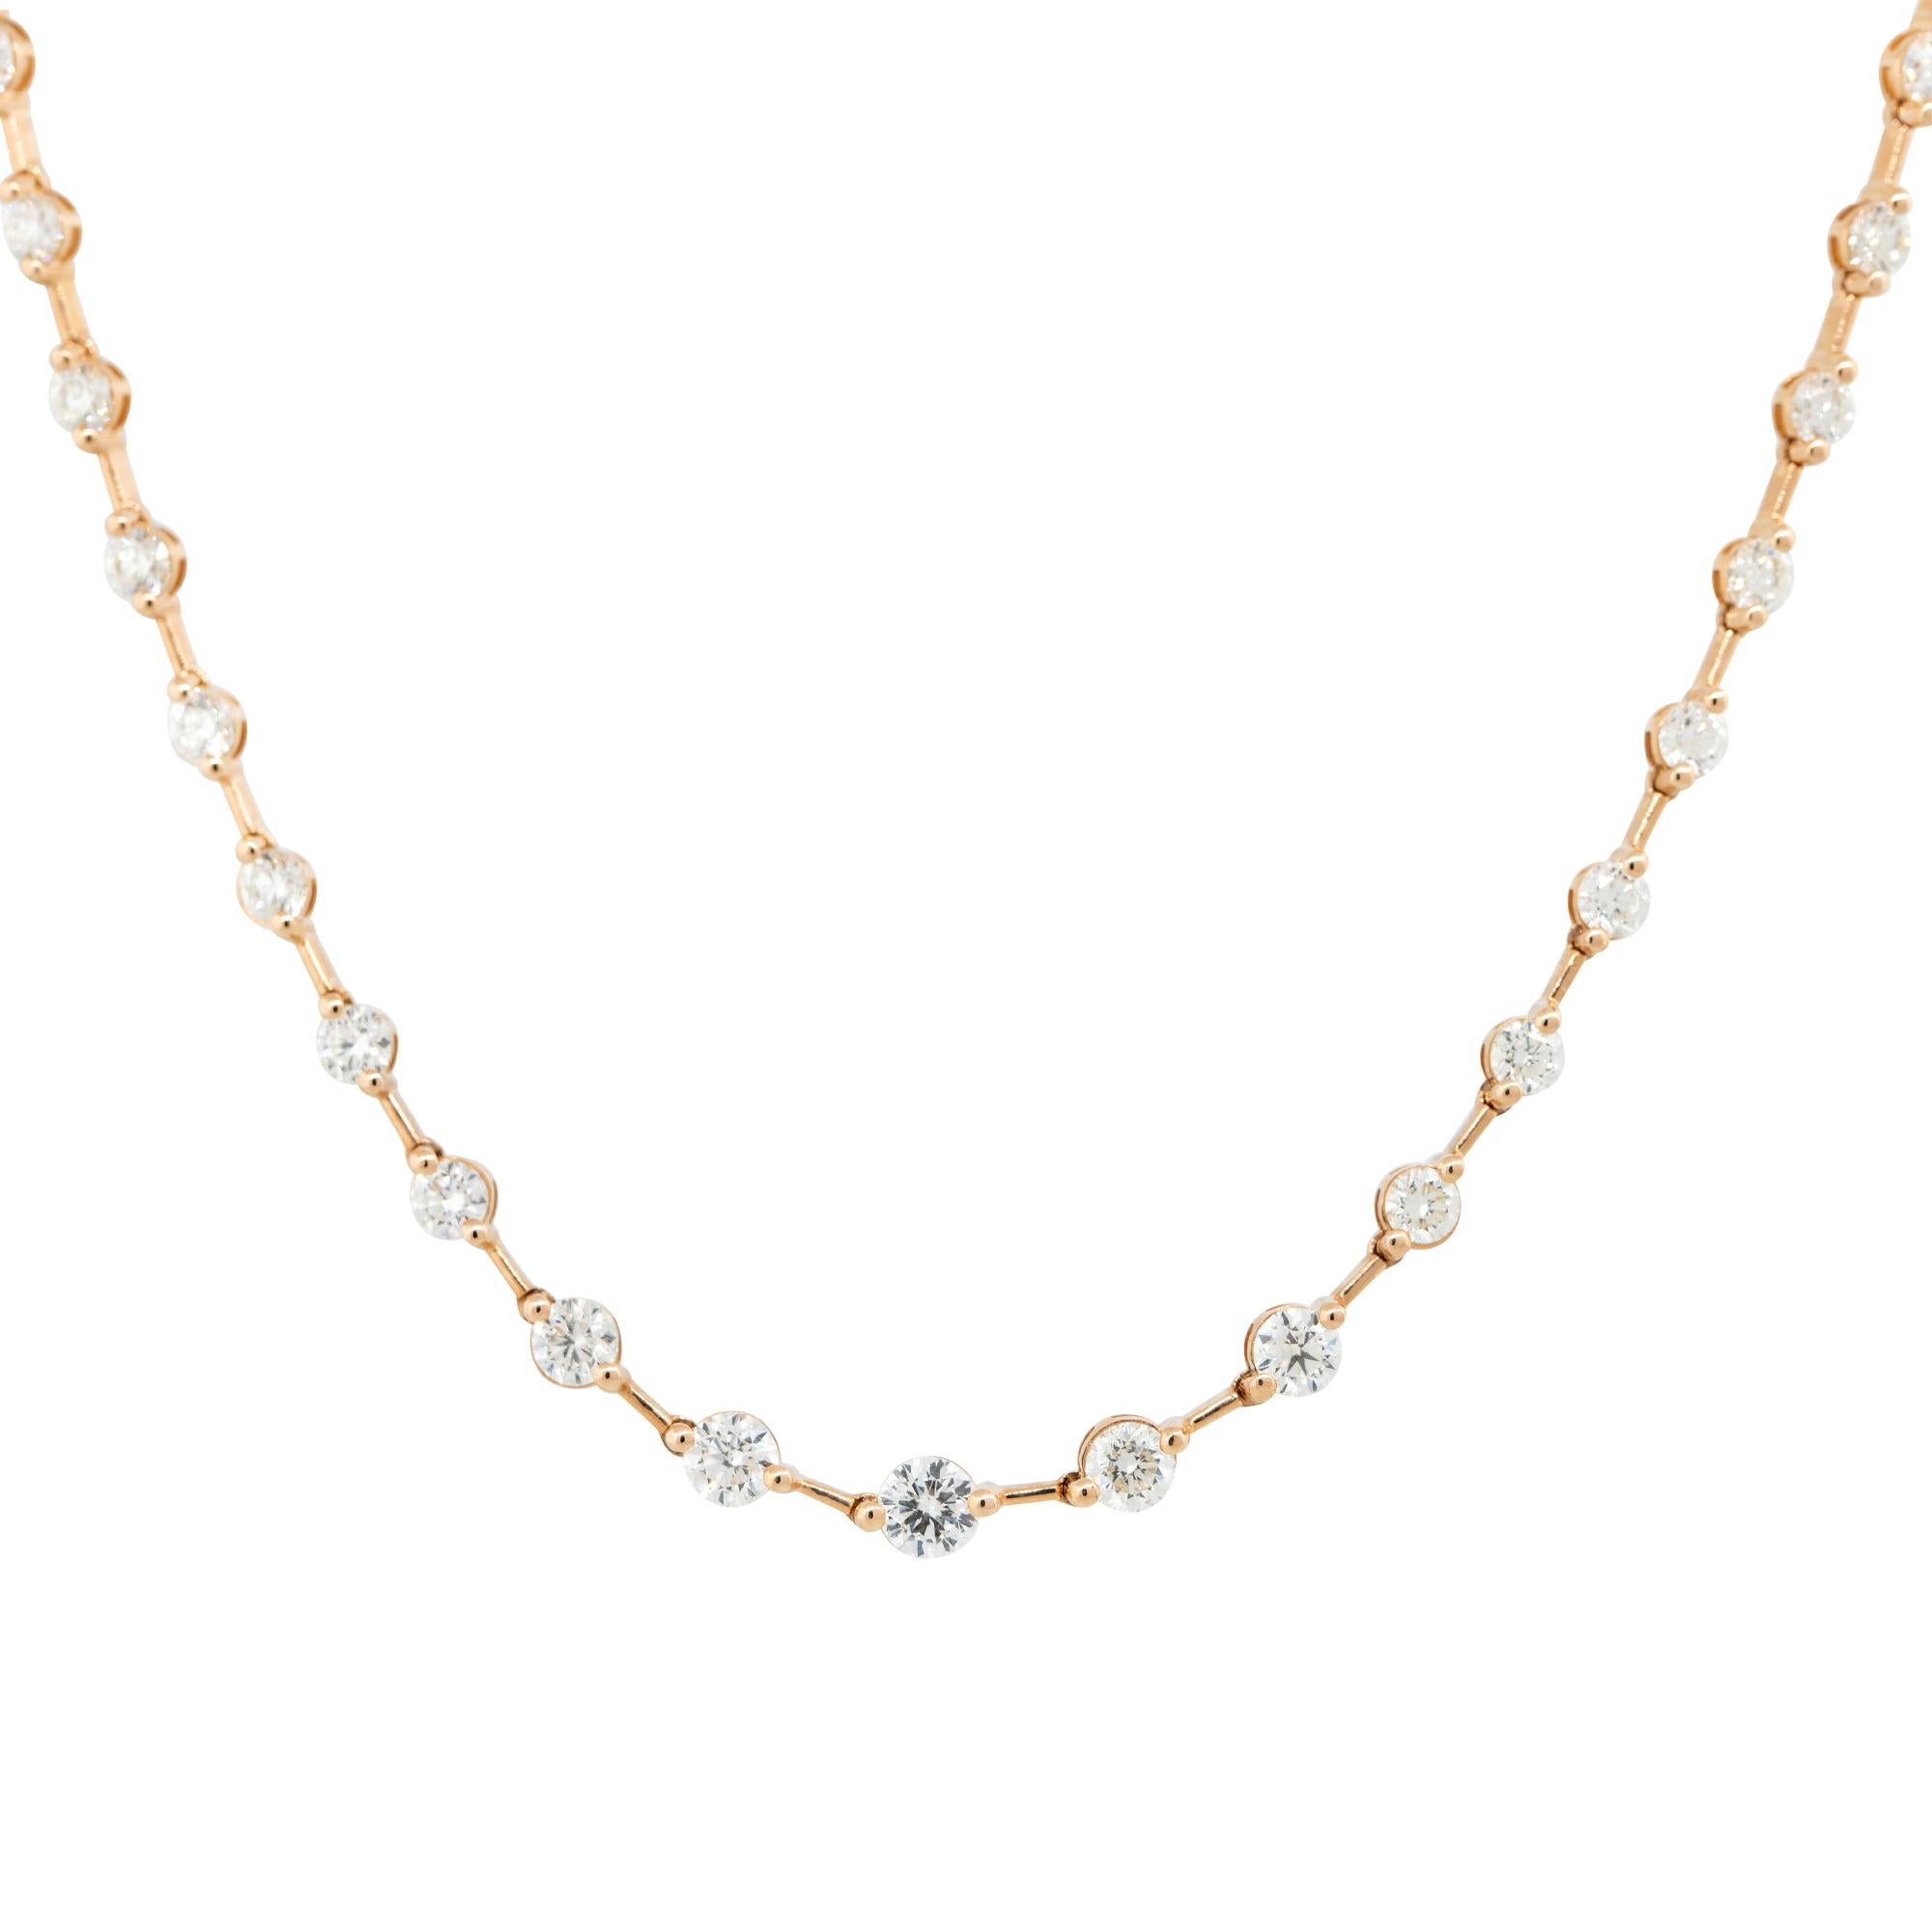 18k Rose Gold 8.41ctw Round Brilliant Diamond Station Necklace
Material: 18k Rose Gold
Diamond Details: Approximately 8.41ctw of Round Brilliant cut Diamonds. There are 48 stones total. Diamonds are approximately H/I in color and approximately SI in